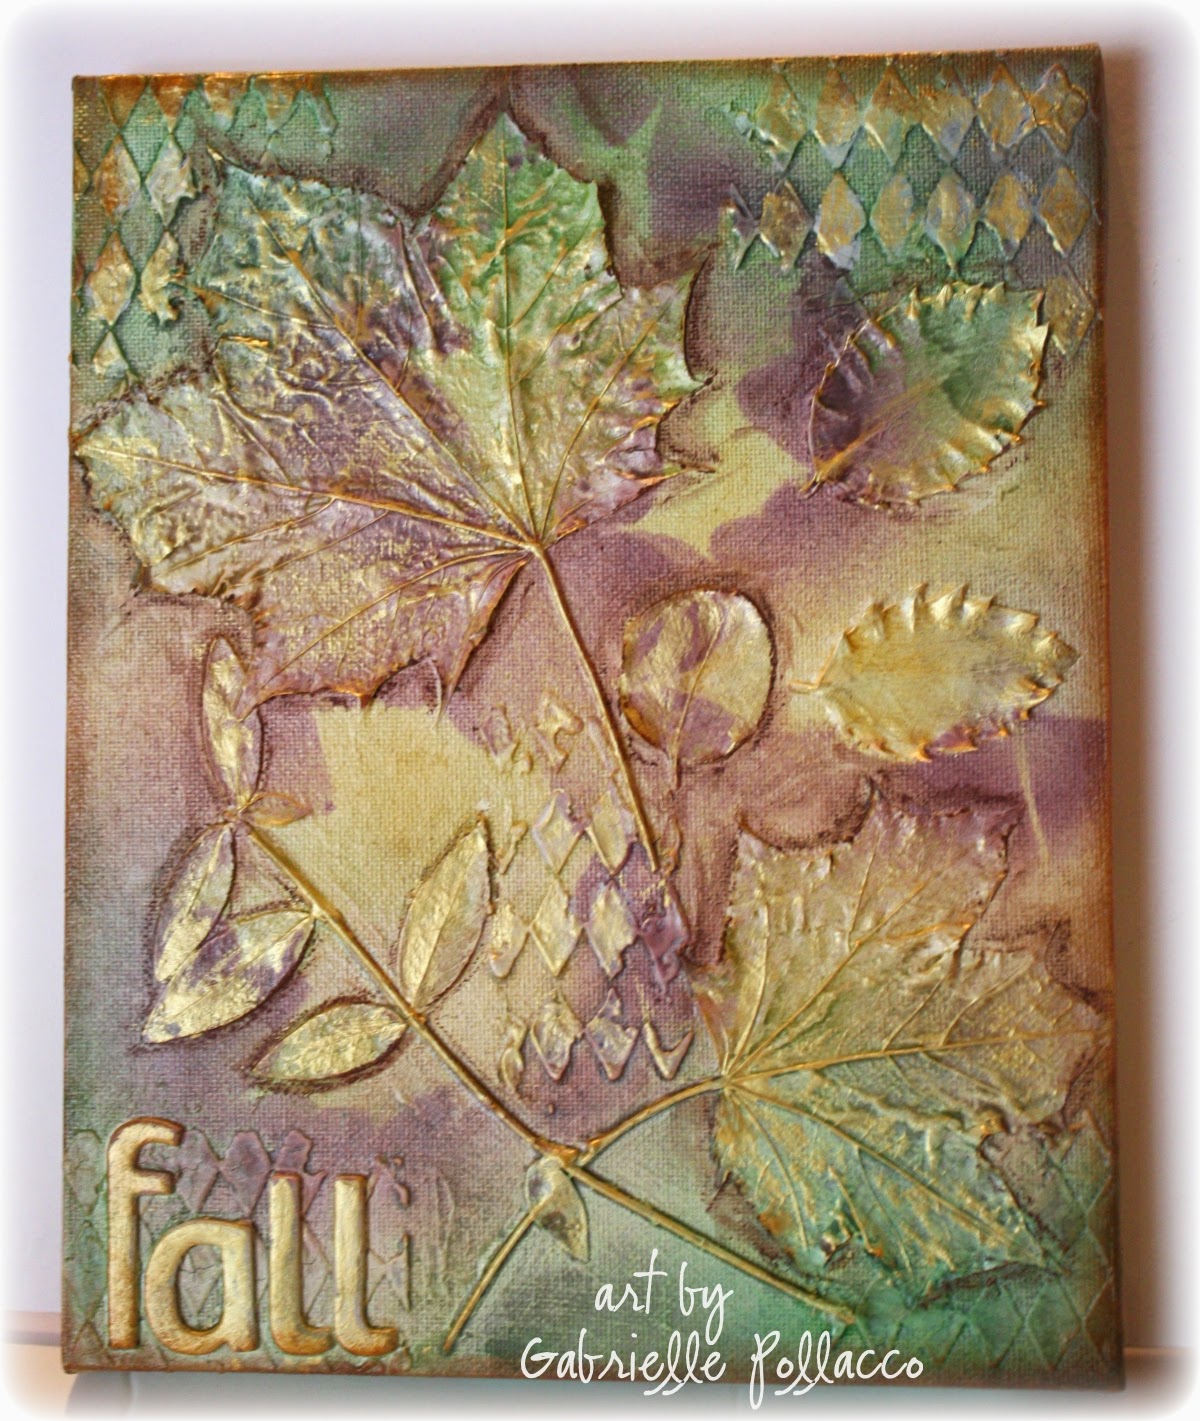 Autumn Canvas by Gabrielle Pollacco using Shimmerz Paints